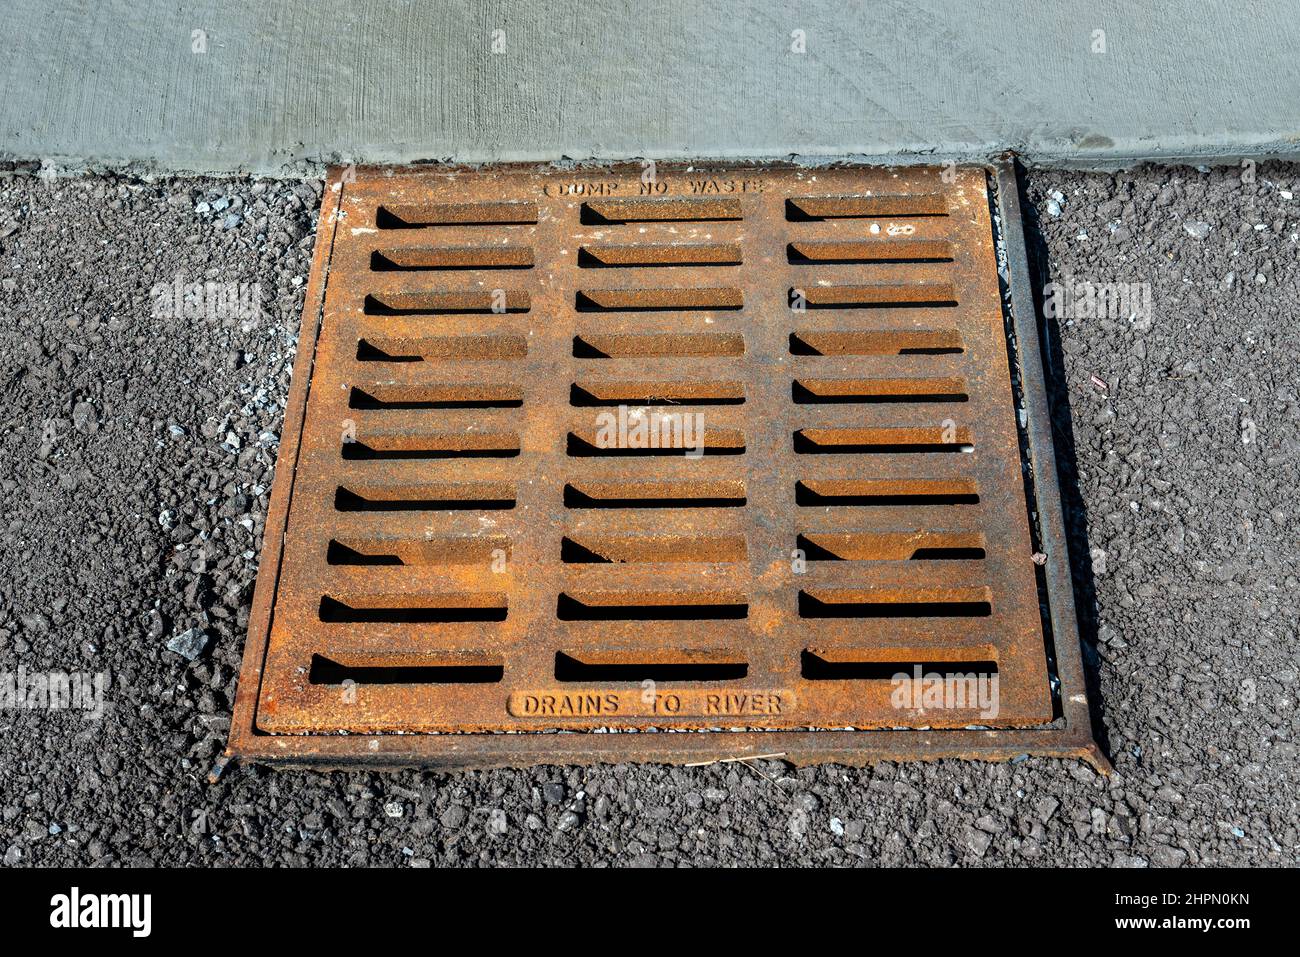 Horizontal shot of a badly rusted sewer grainage grate at a construction site. Stock Photo